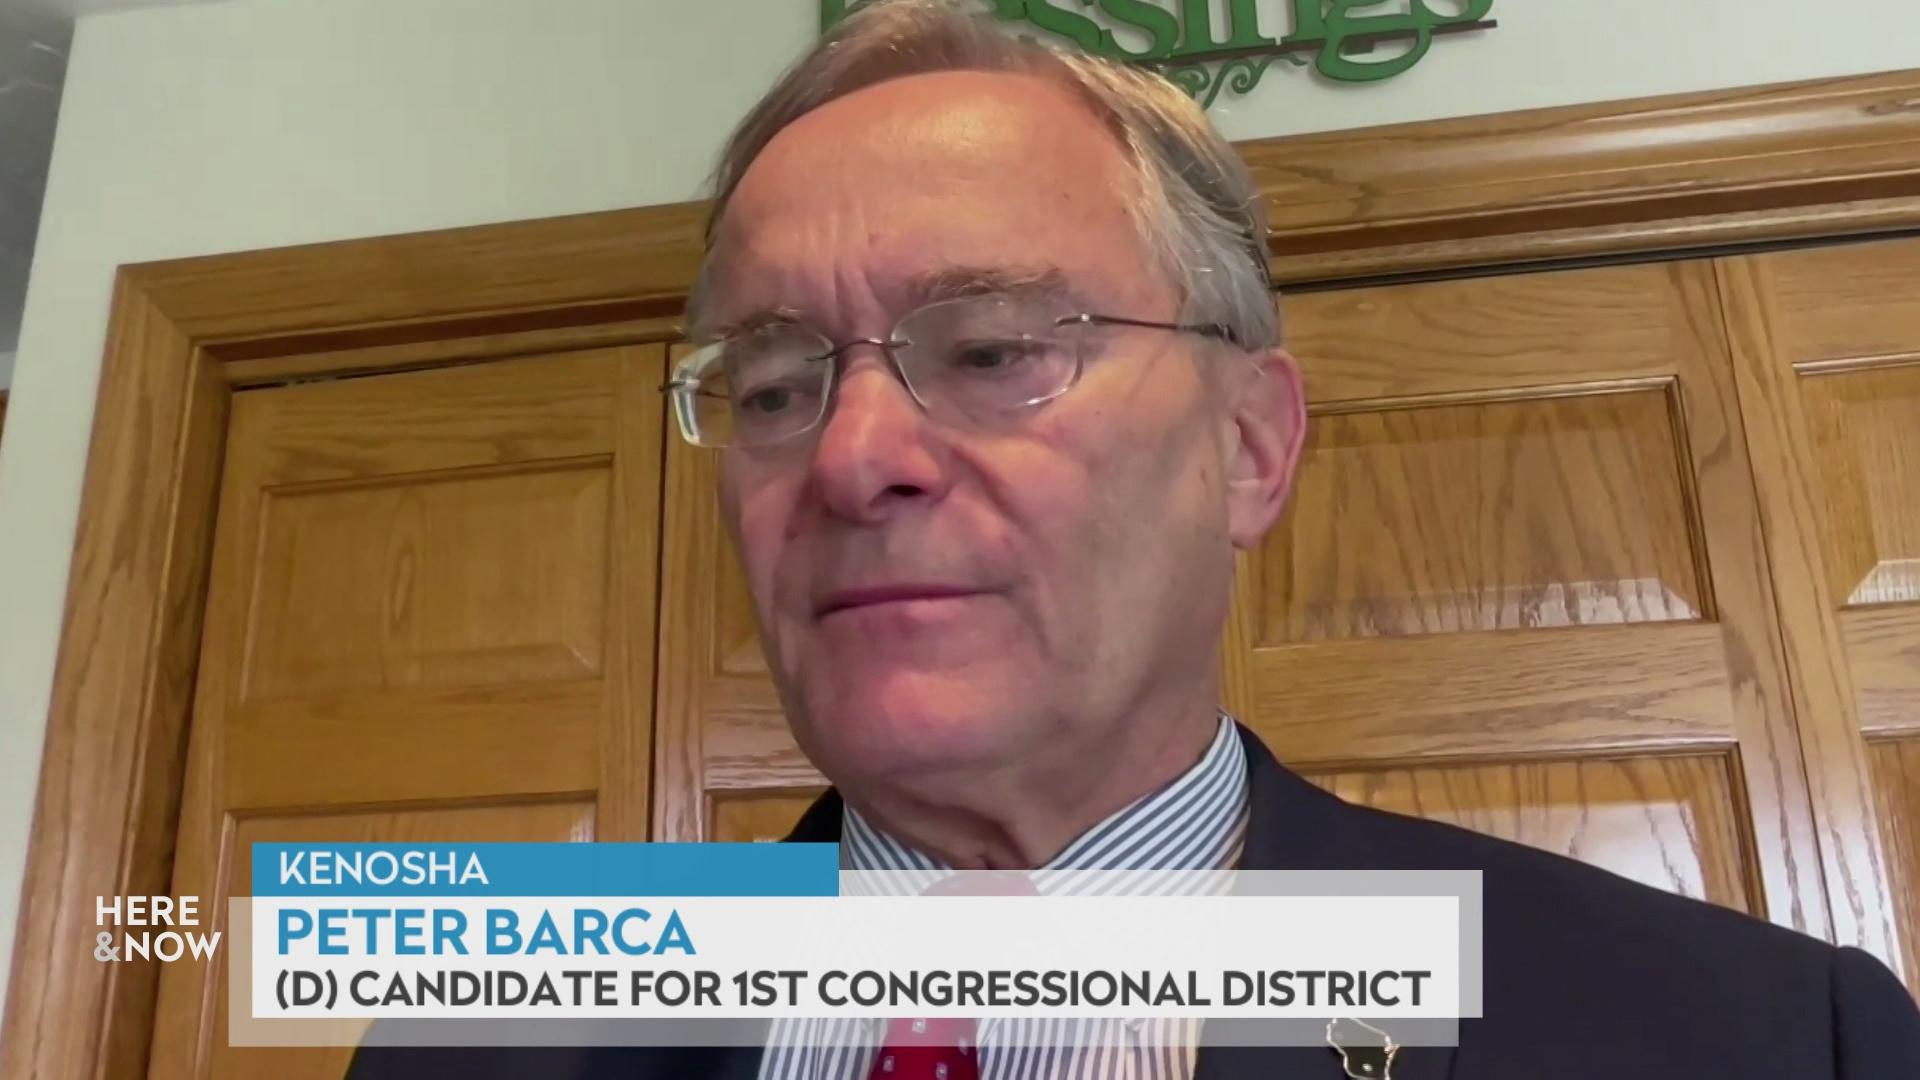 A still image from a video shows Peter Barca in front of wooden doors with a graphic at bottom reading 'Kenosha,' 'Peter Barca' and '(D) Candidate for 1st Congressional District.'